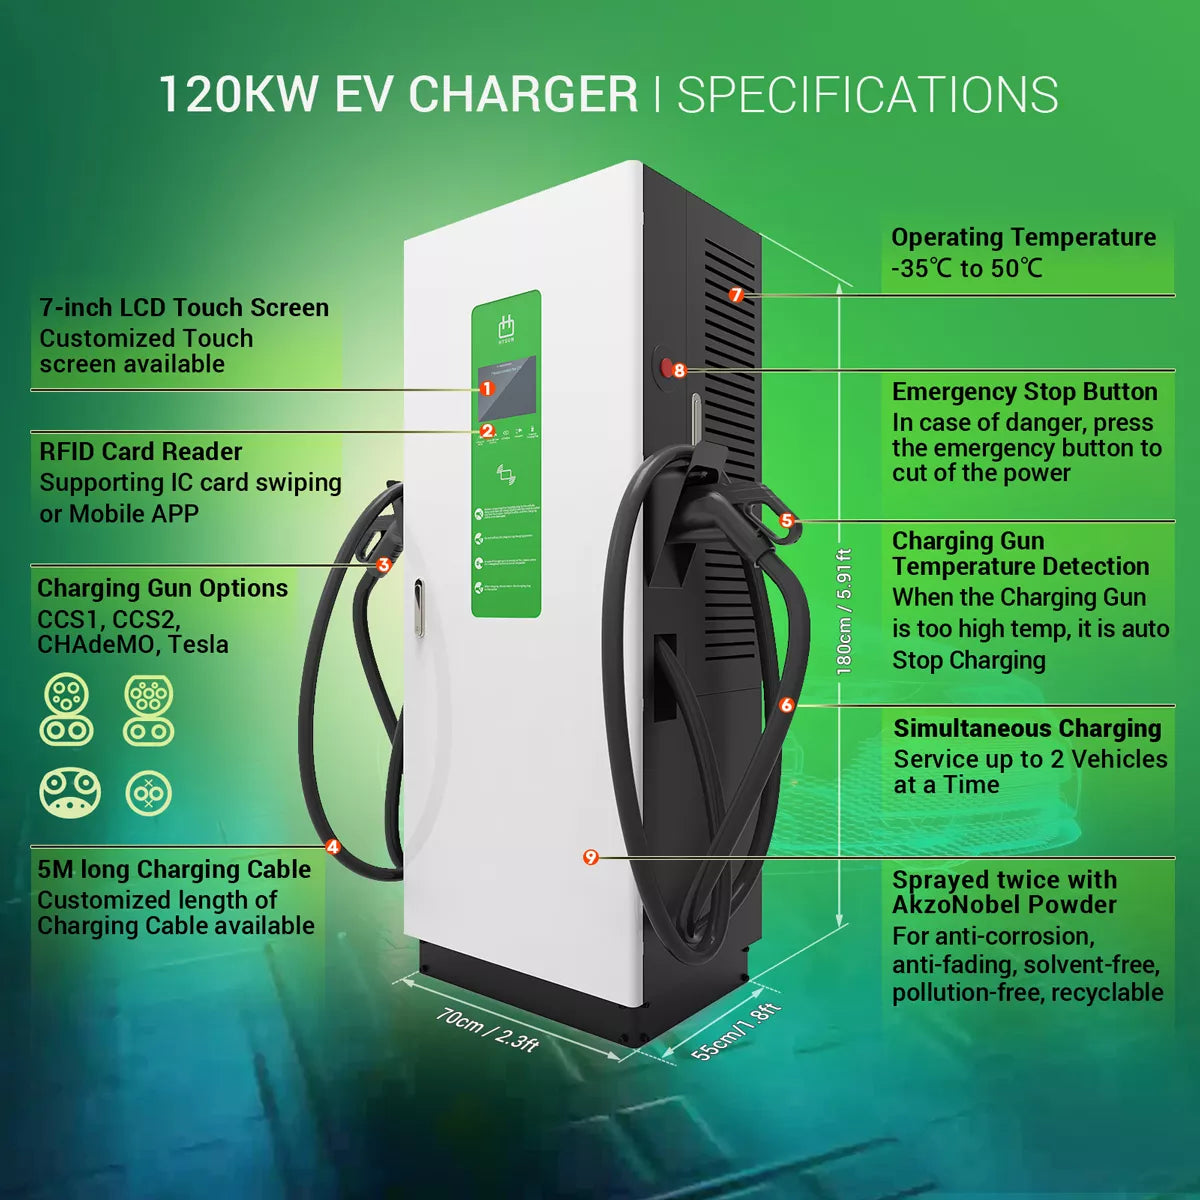 DC fast charger 120KW